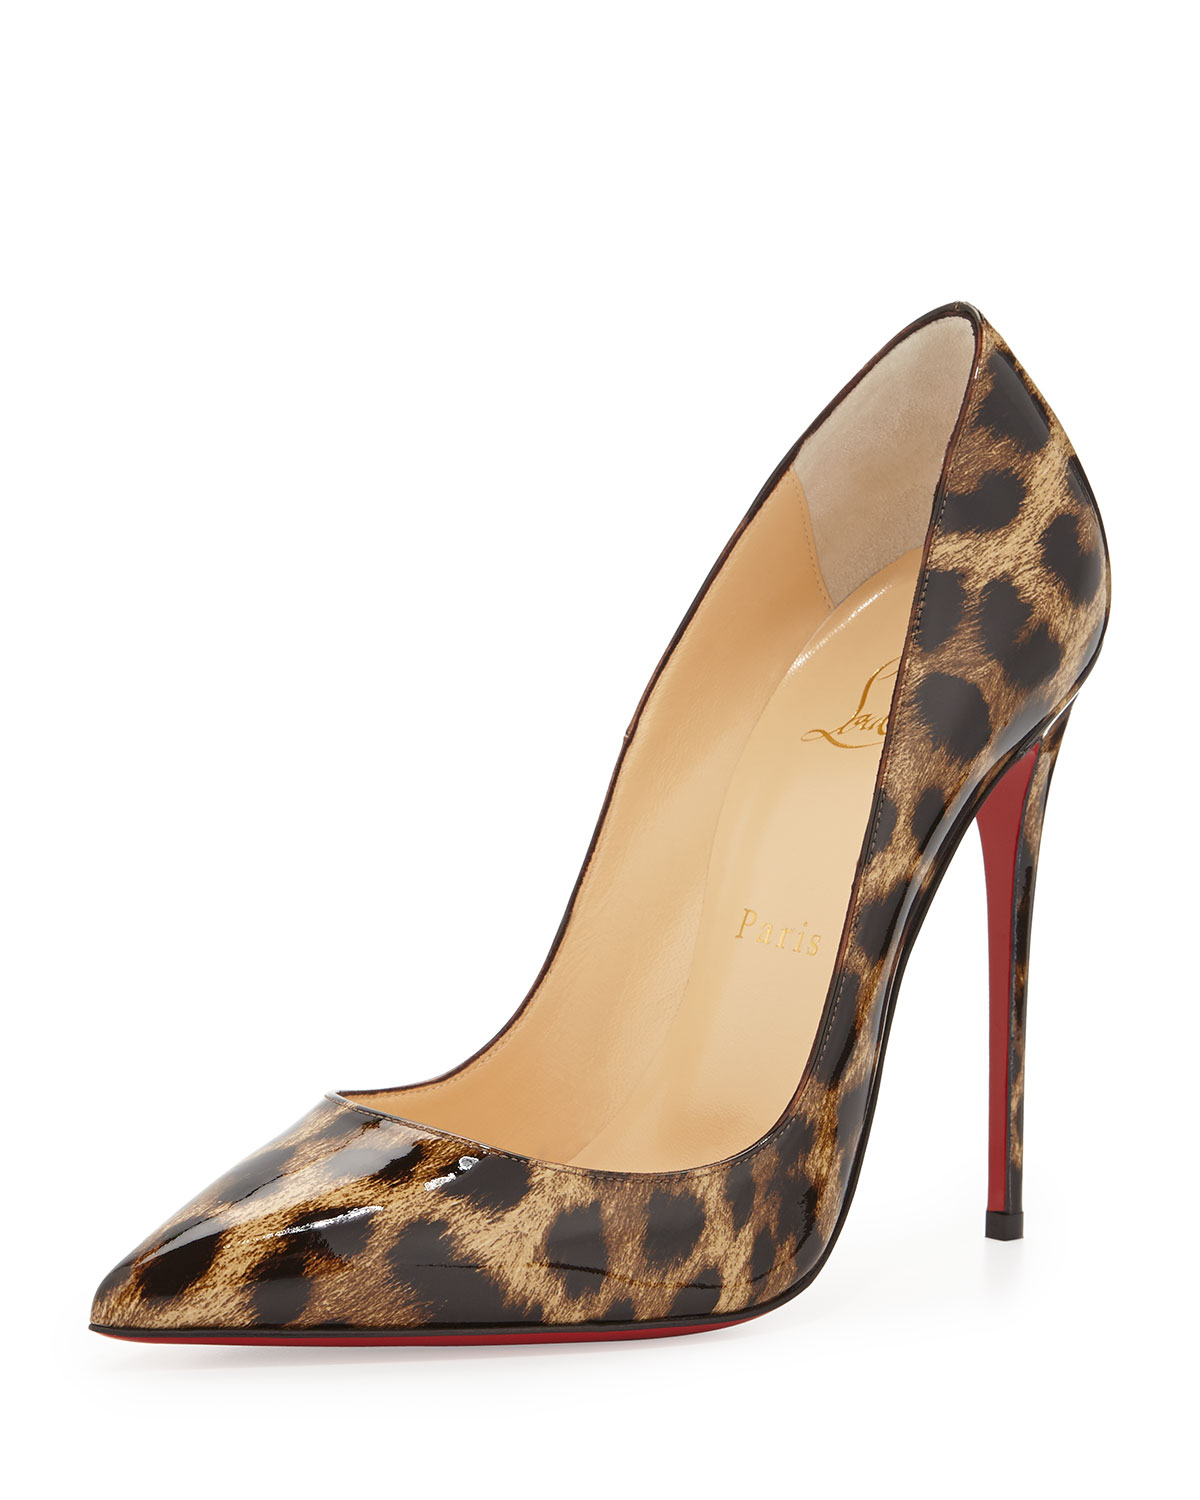 Christian louboutin So Kate Leopard-Print Patent Red Sole Pump in ...